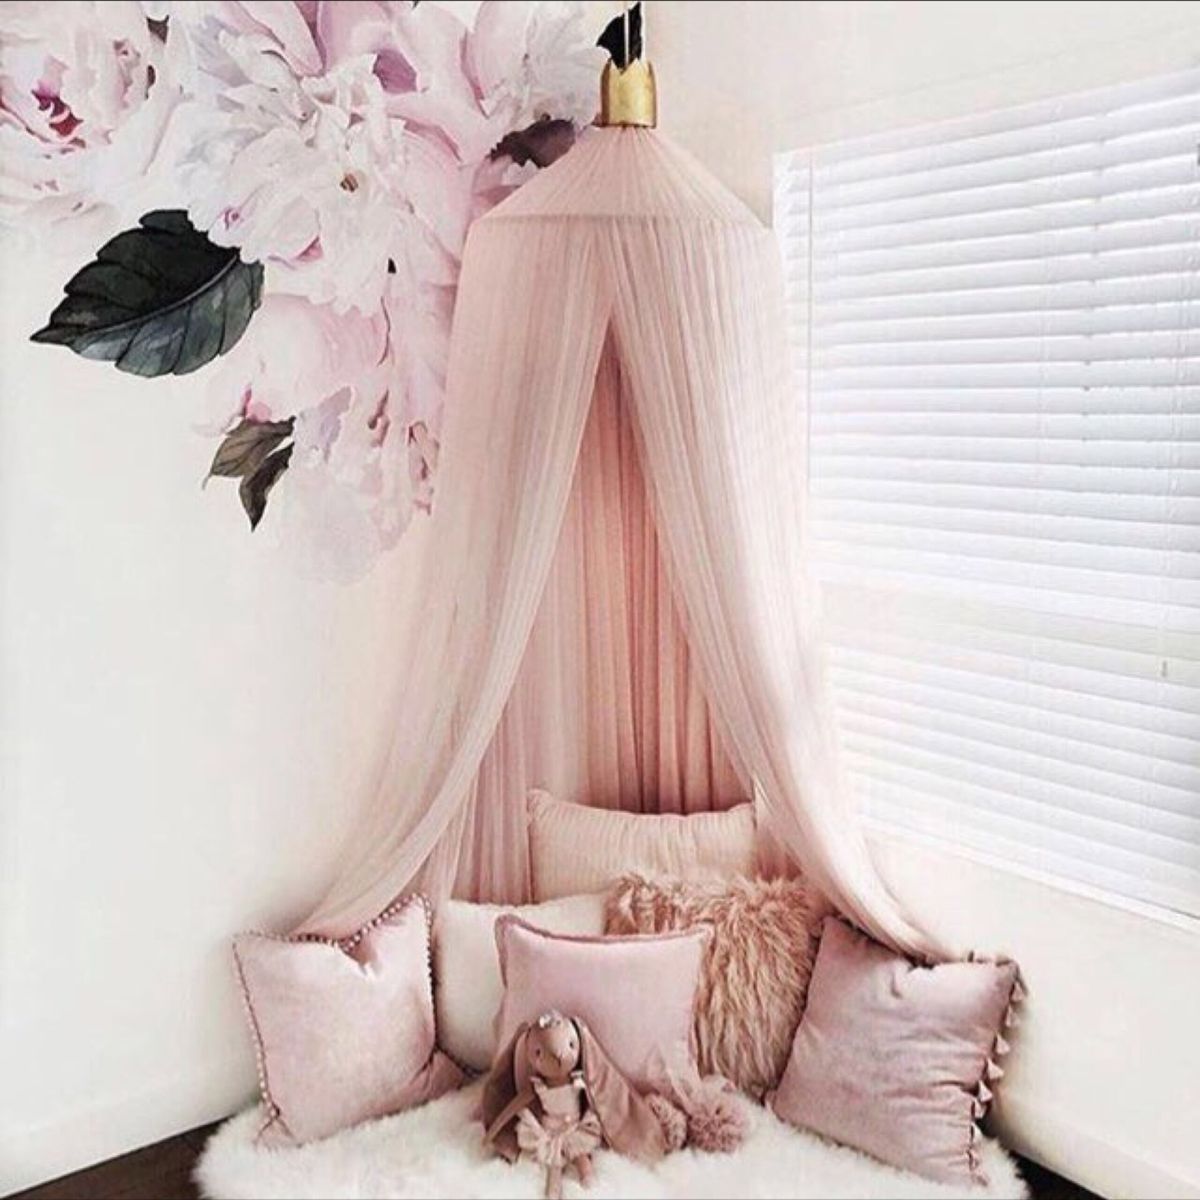 Unique 10 Layers Yarn Princess Bed Net Canopy- 3 Colors -   14 room decor Boho canopies ideas